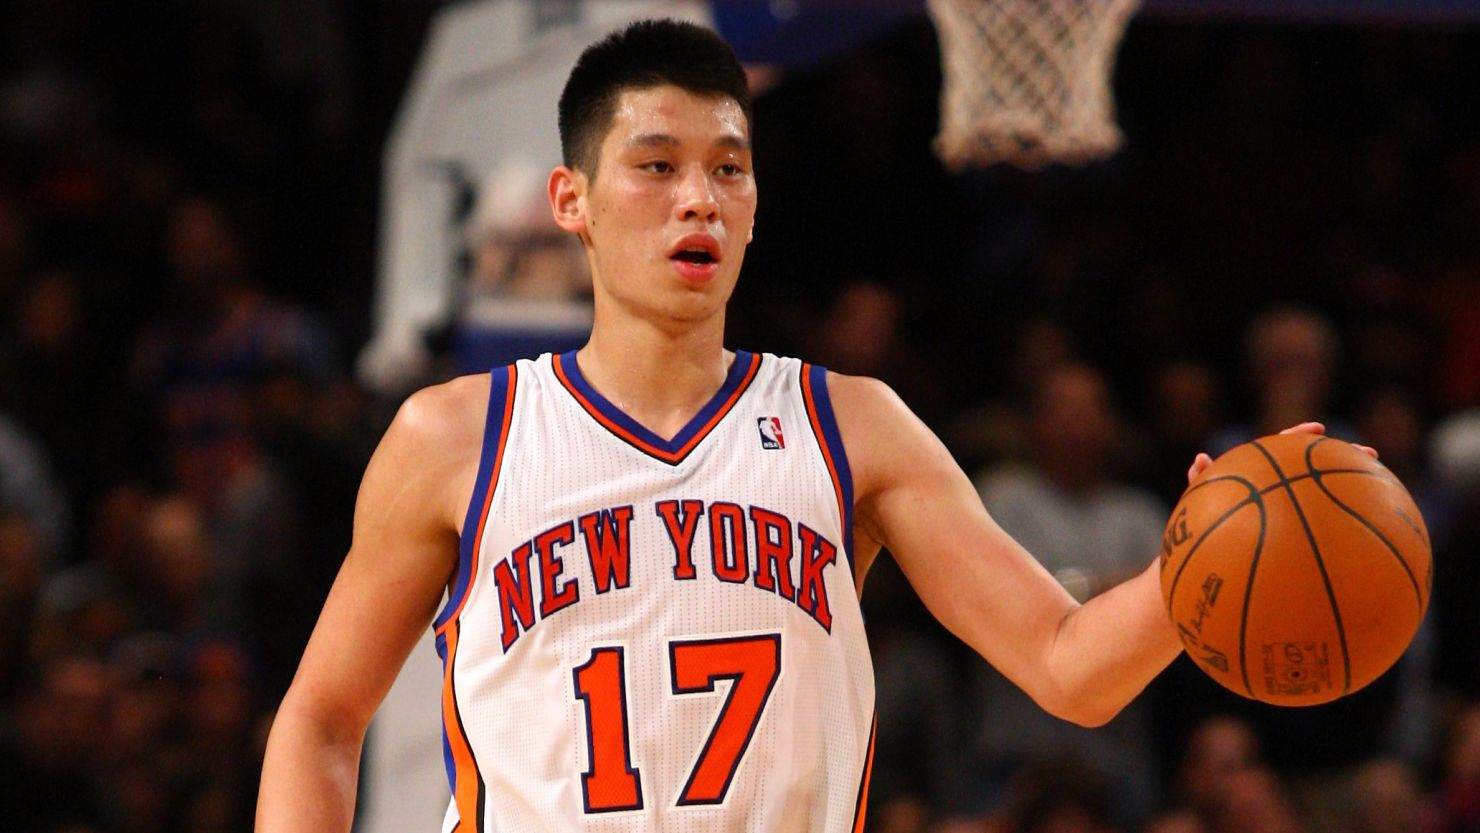 Jeremy Lin holds the ball as the New York Knicks play the Los Angeles Lakers in New York last week.